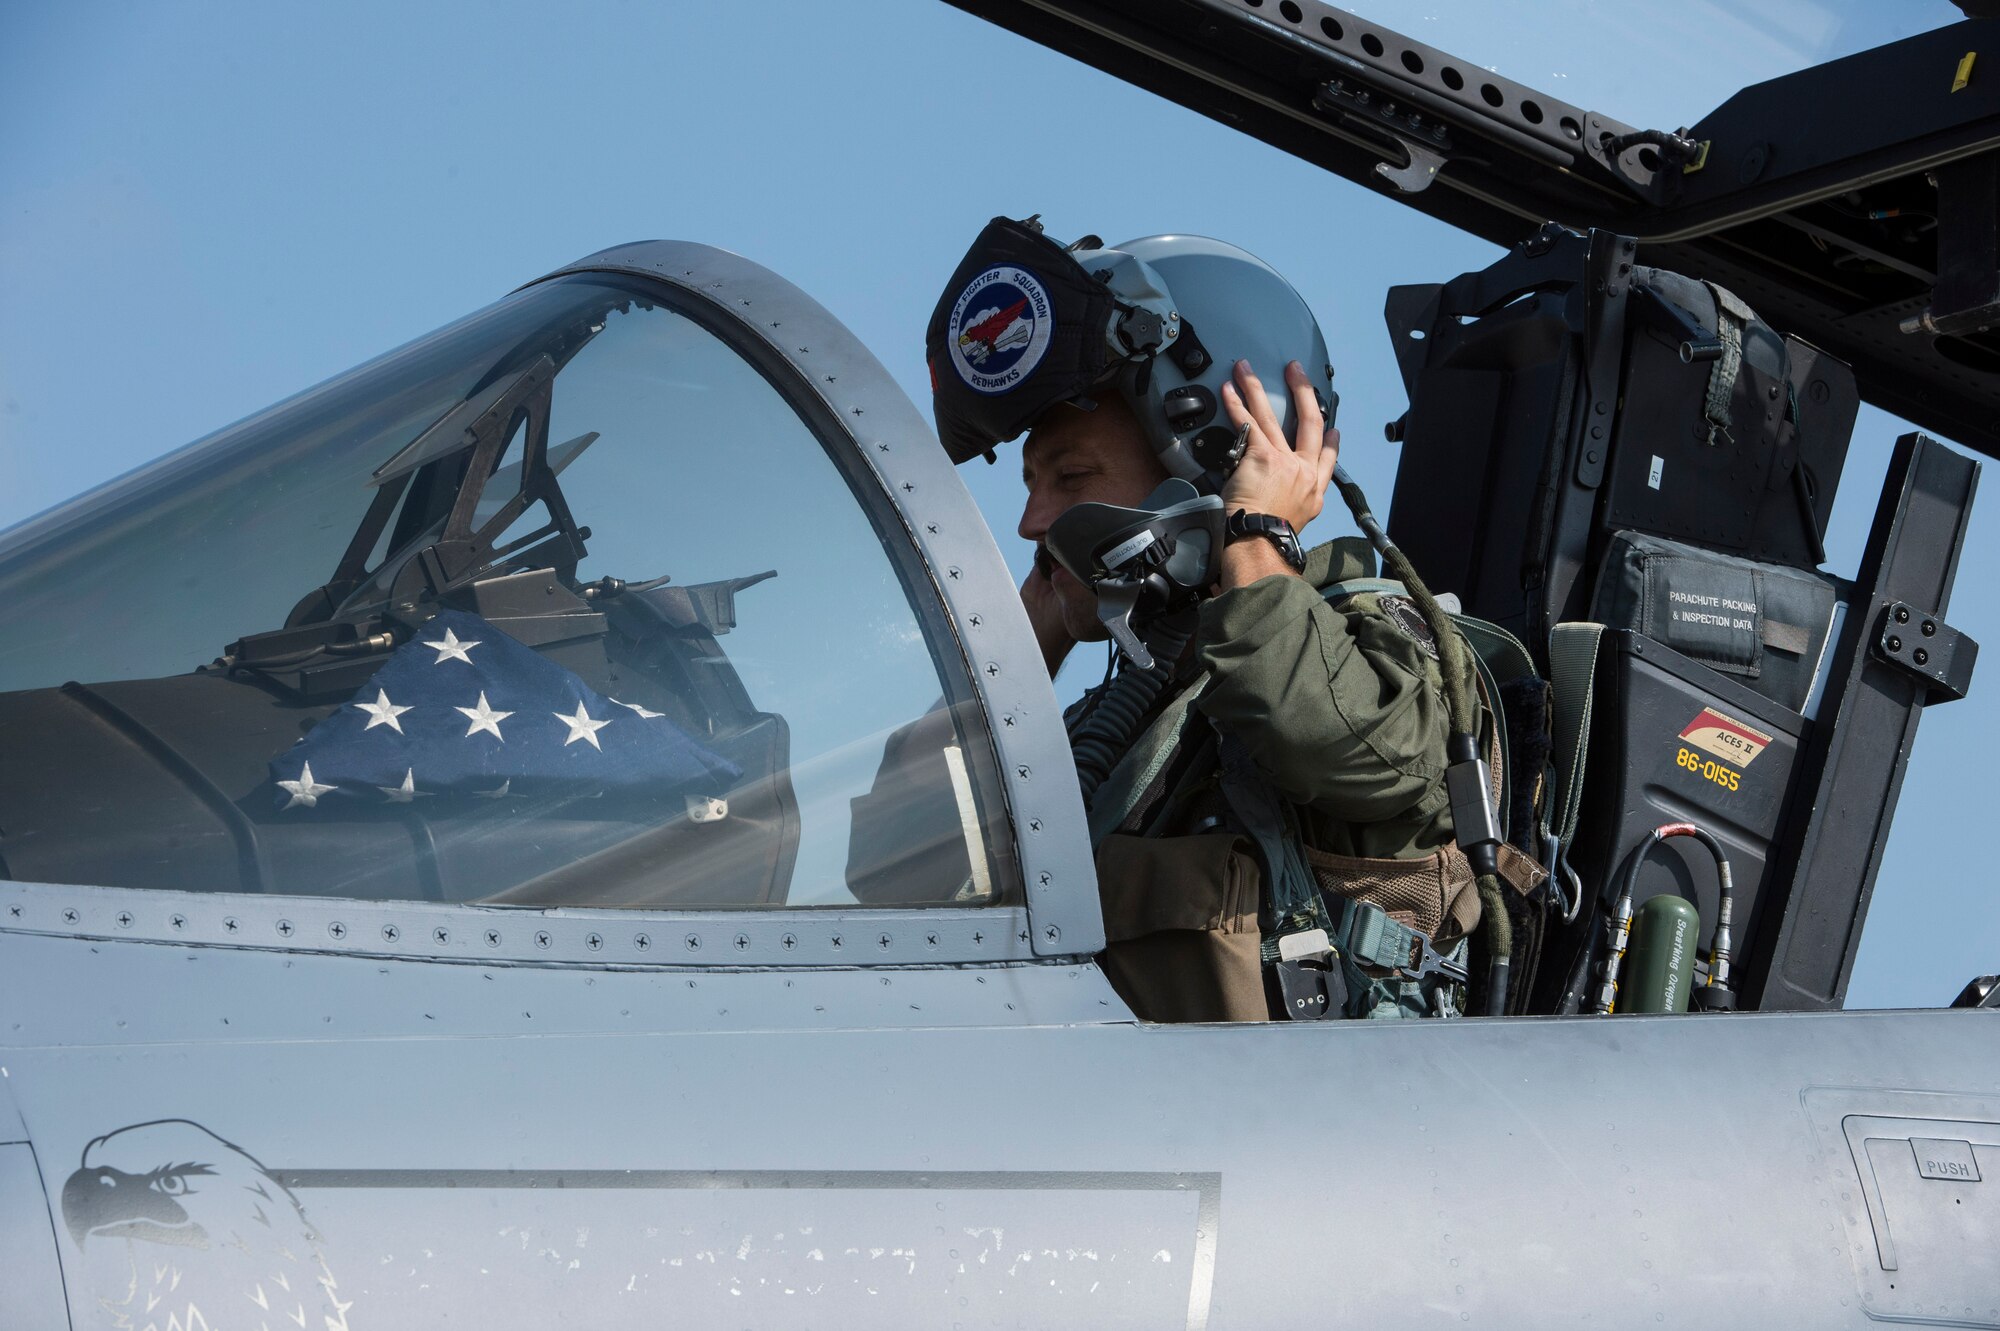 An F-15C Eagle fighter aircraft pilot assigned to the 123rd Expeditionary Fighter Squadron, 142nd Fighter Wing, Oregon Air National Guard, dons his helmet during a theater security package deployment Sept. 25, 2015, at Campia Turzii, Romania. The U.S. Air Force, NATO allies and partners’ continuing contributions to develop and improve air readiness are significant in maintaining security and building partnership capacity. (U.S. Air Force photo by Staff Sgt. Christopher Ruano/Released)